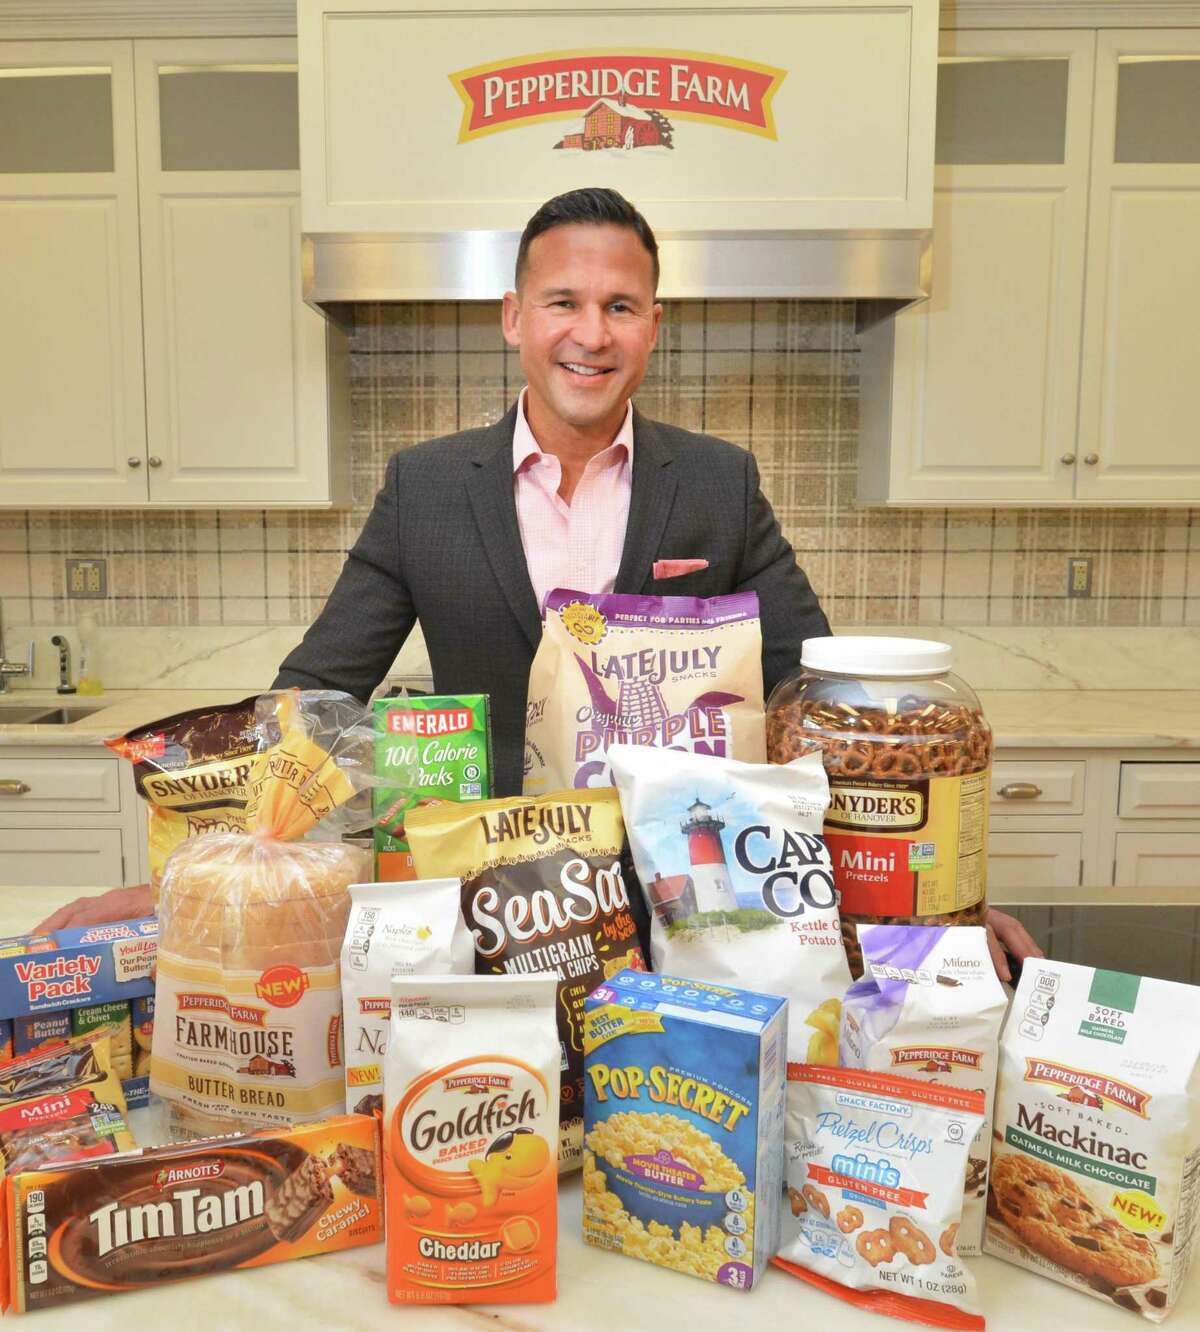 Carlos Abrams-Rivera, president of the Campbell’s Snacks division of Campbell Soup, in mid-April 2018 at subsidiary Pepperidge Farm’s corporate offices in Norwalk Conn.